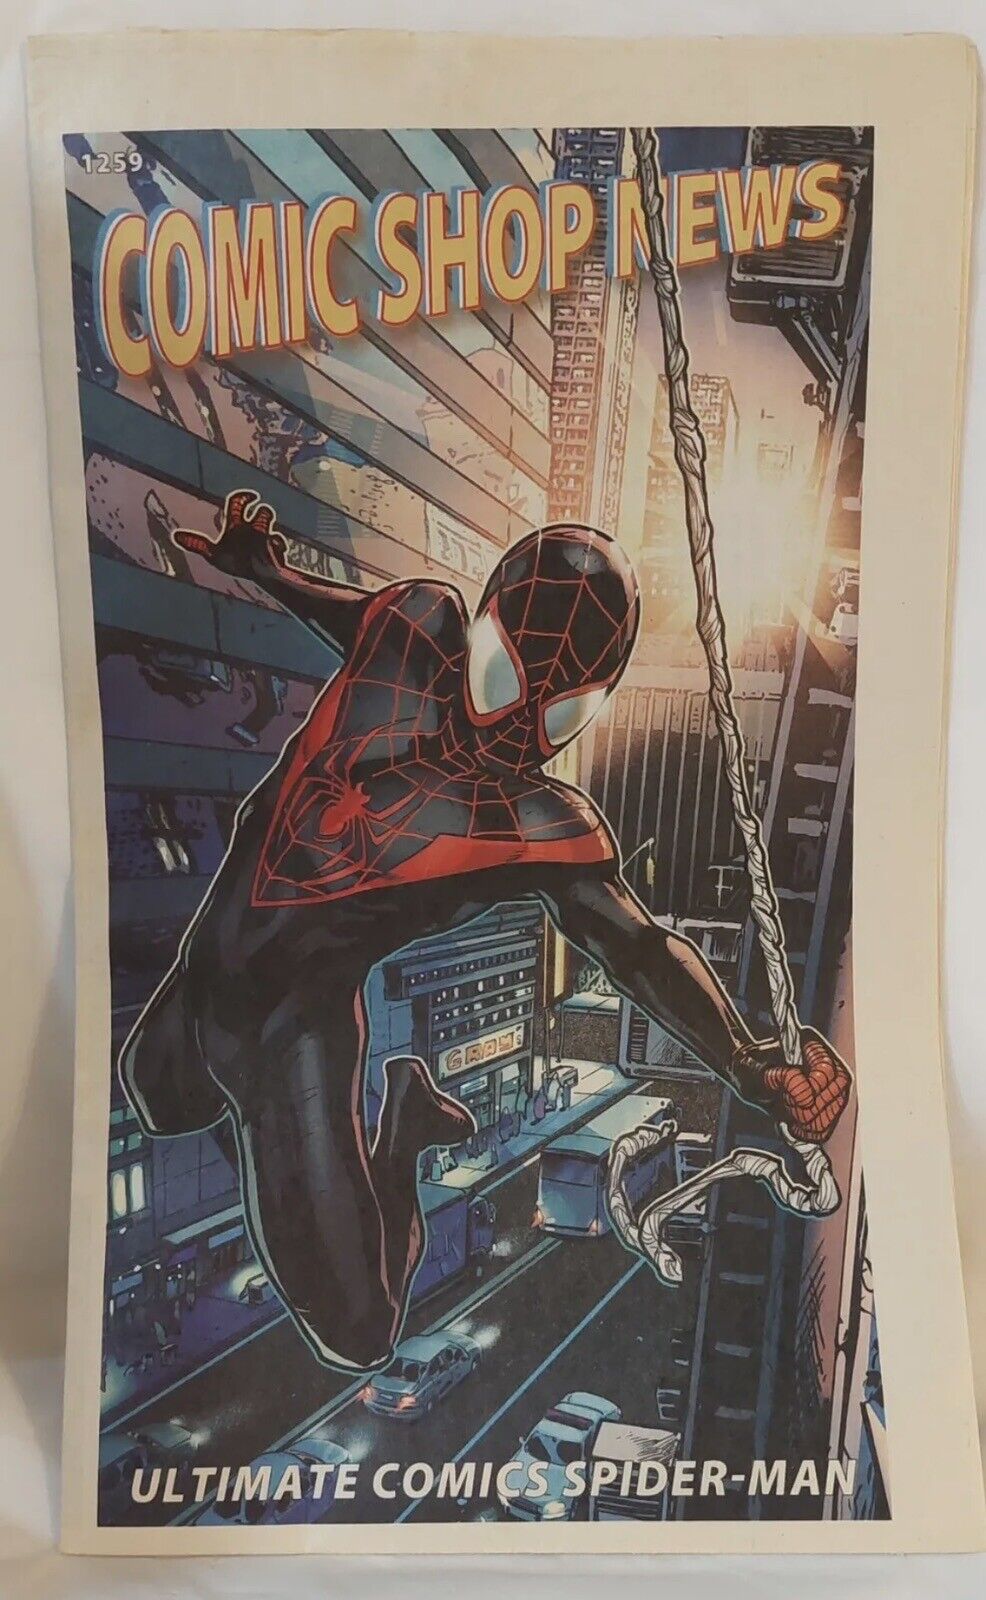 Comic Shop News #1259 | 1st Appearance of Miles Morales Spider-man